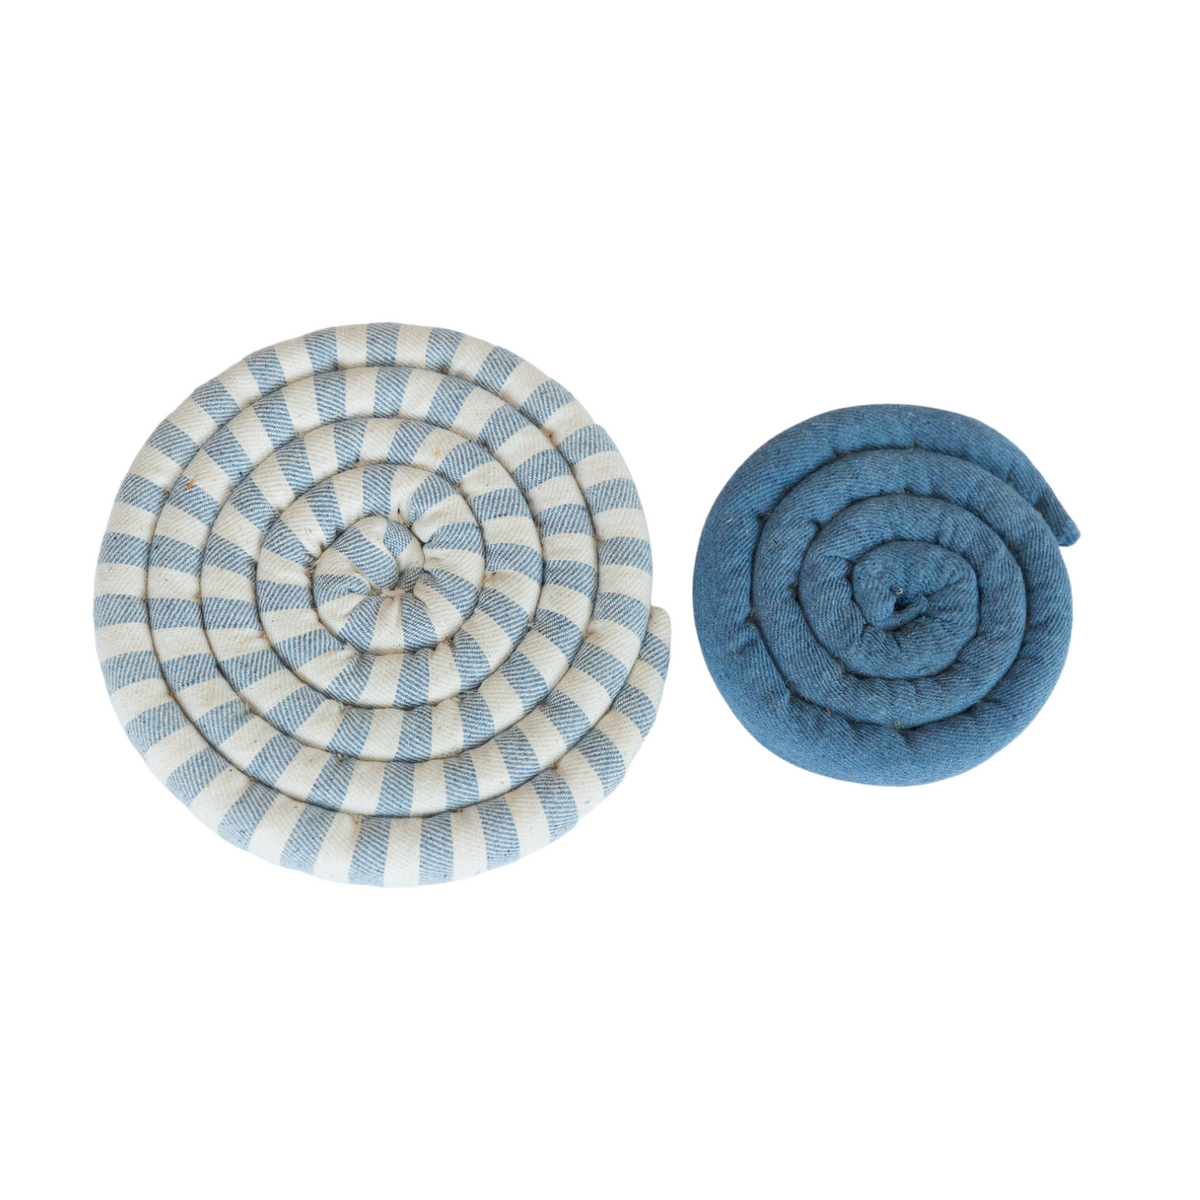 Upcycled Denim Trivets - Set of two